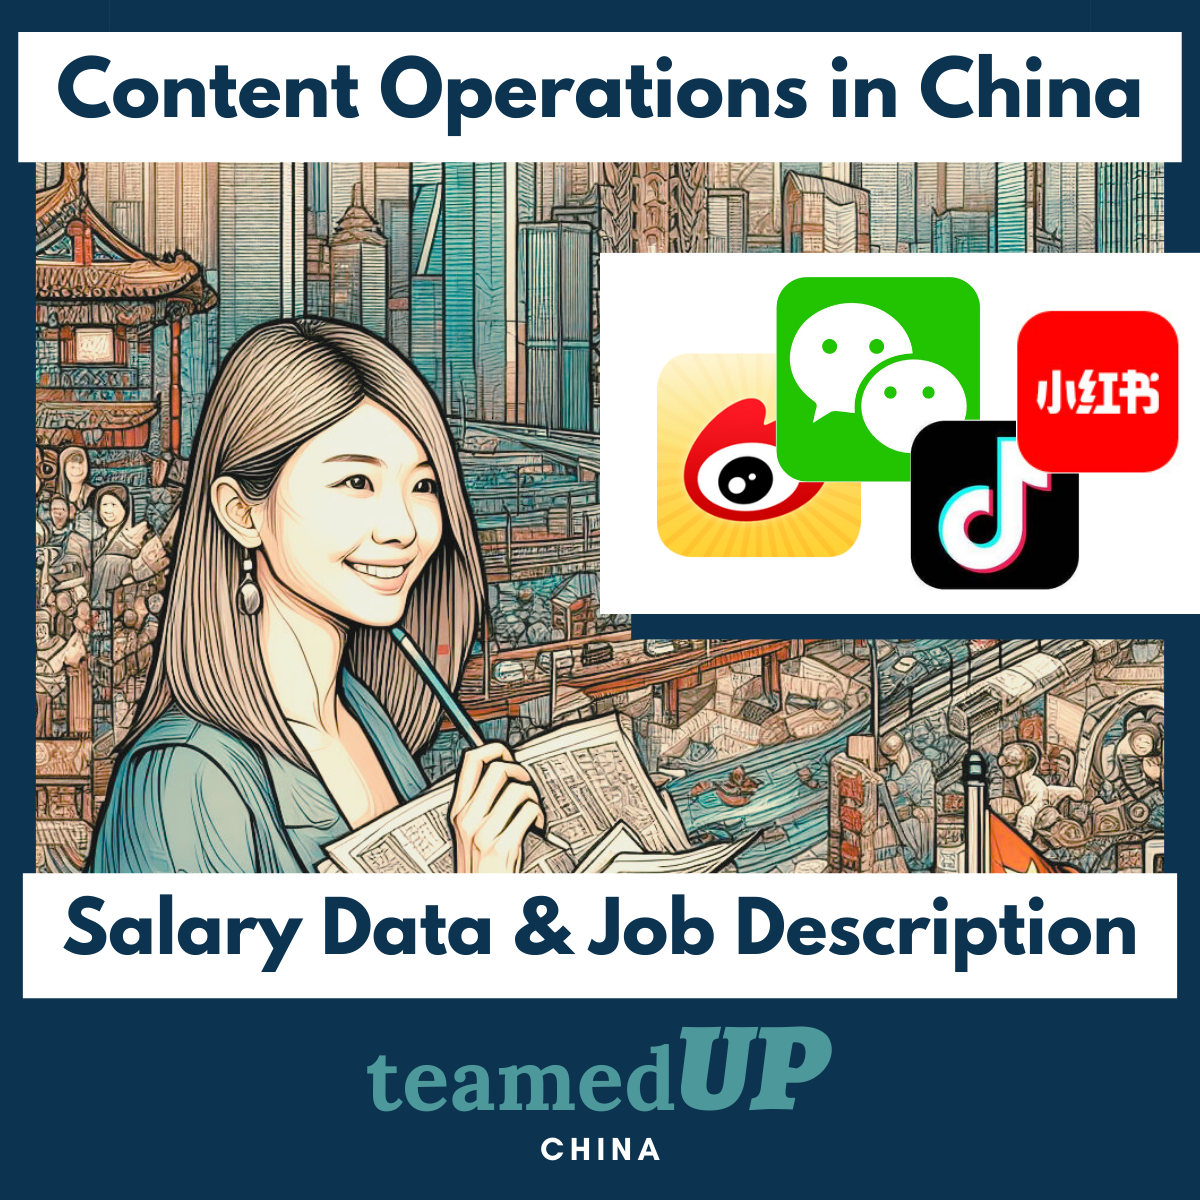 Content Operations in China - Average Salary and JD - TeamedUp China